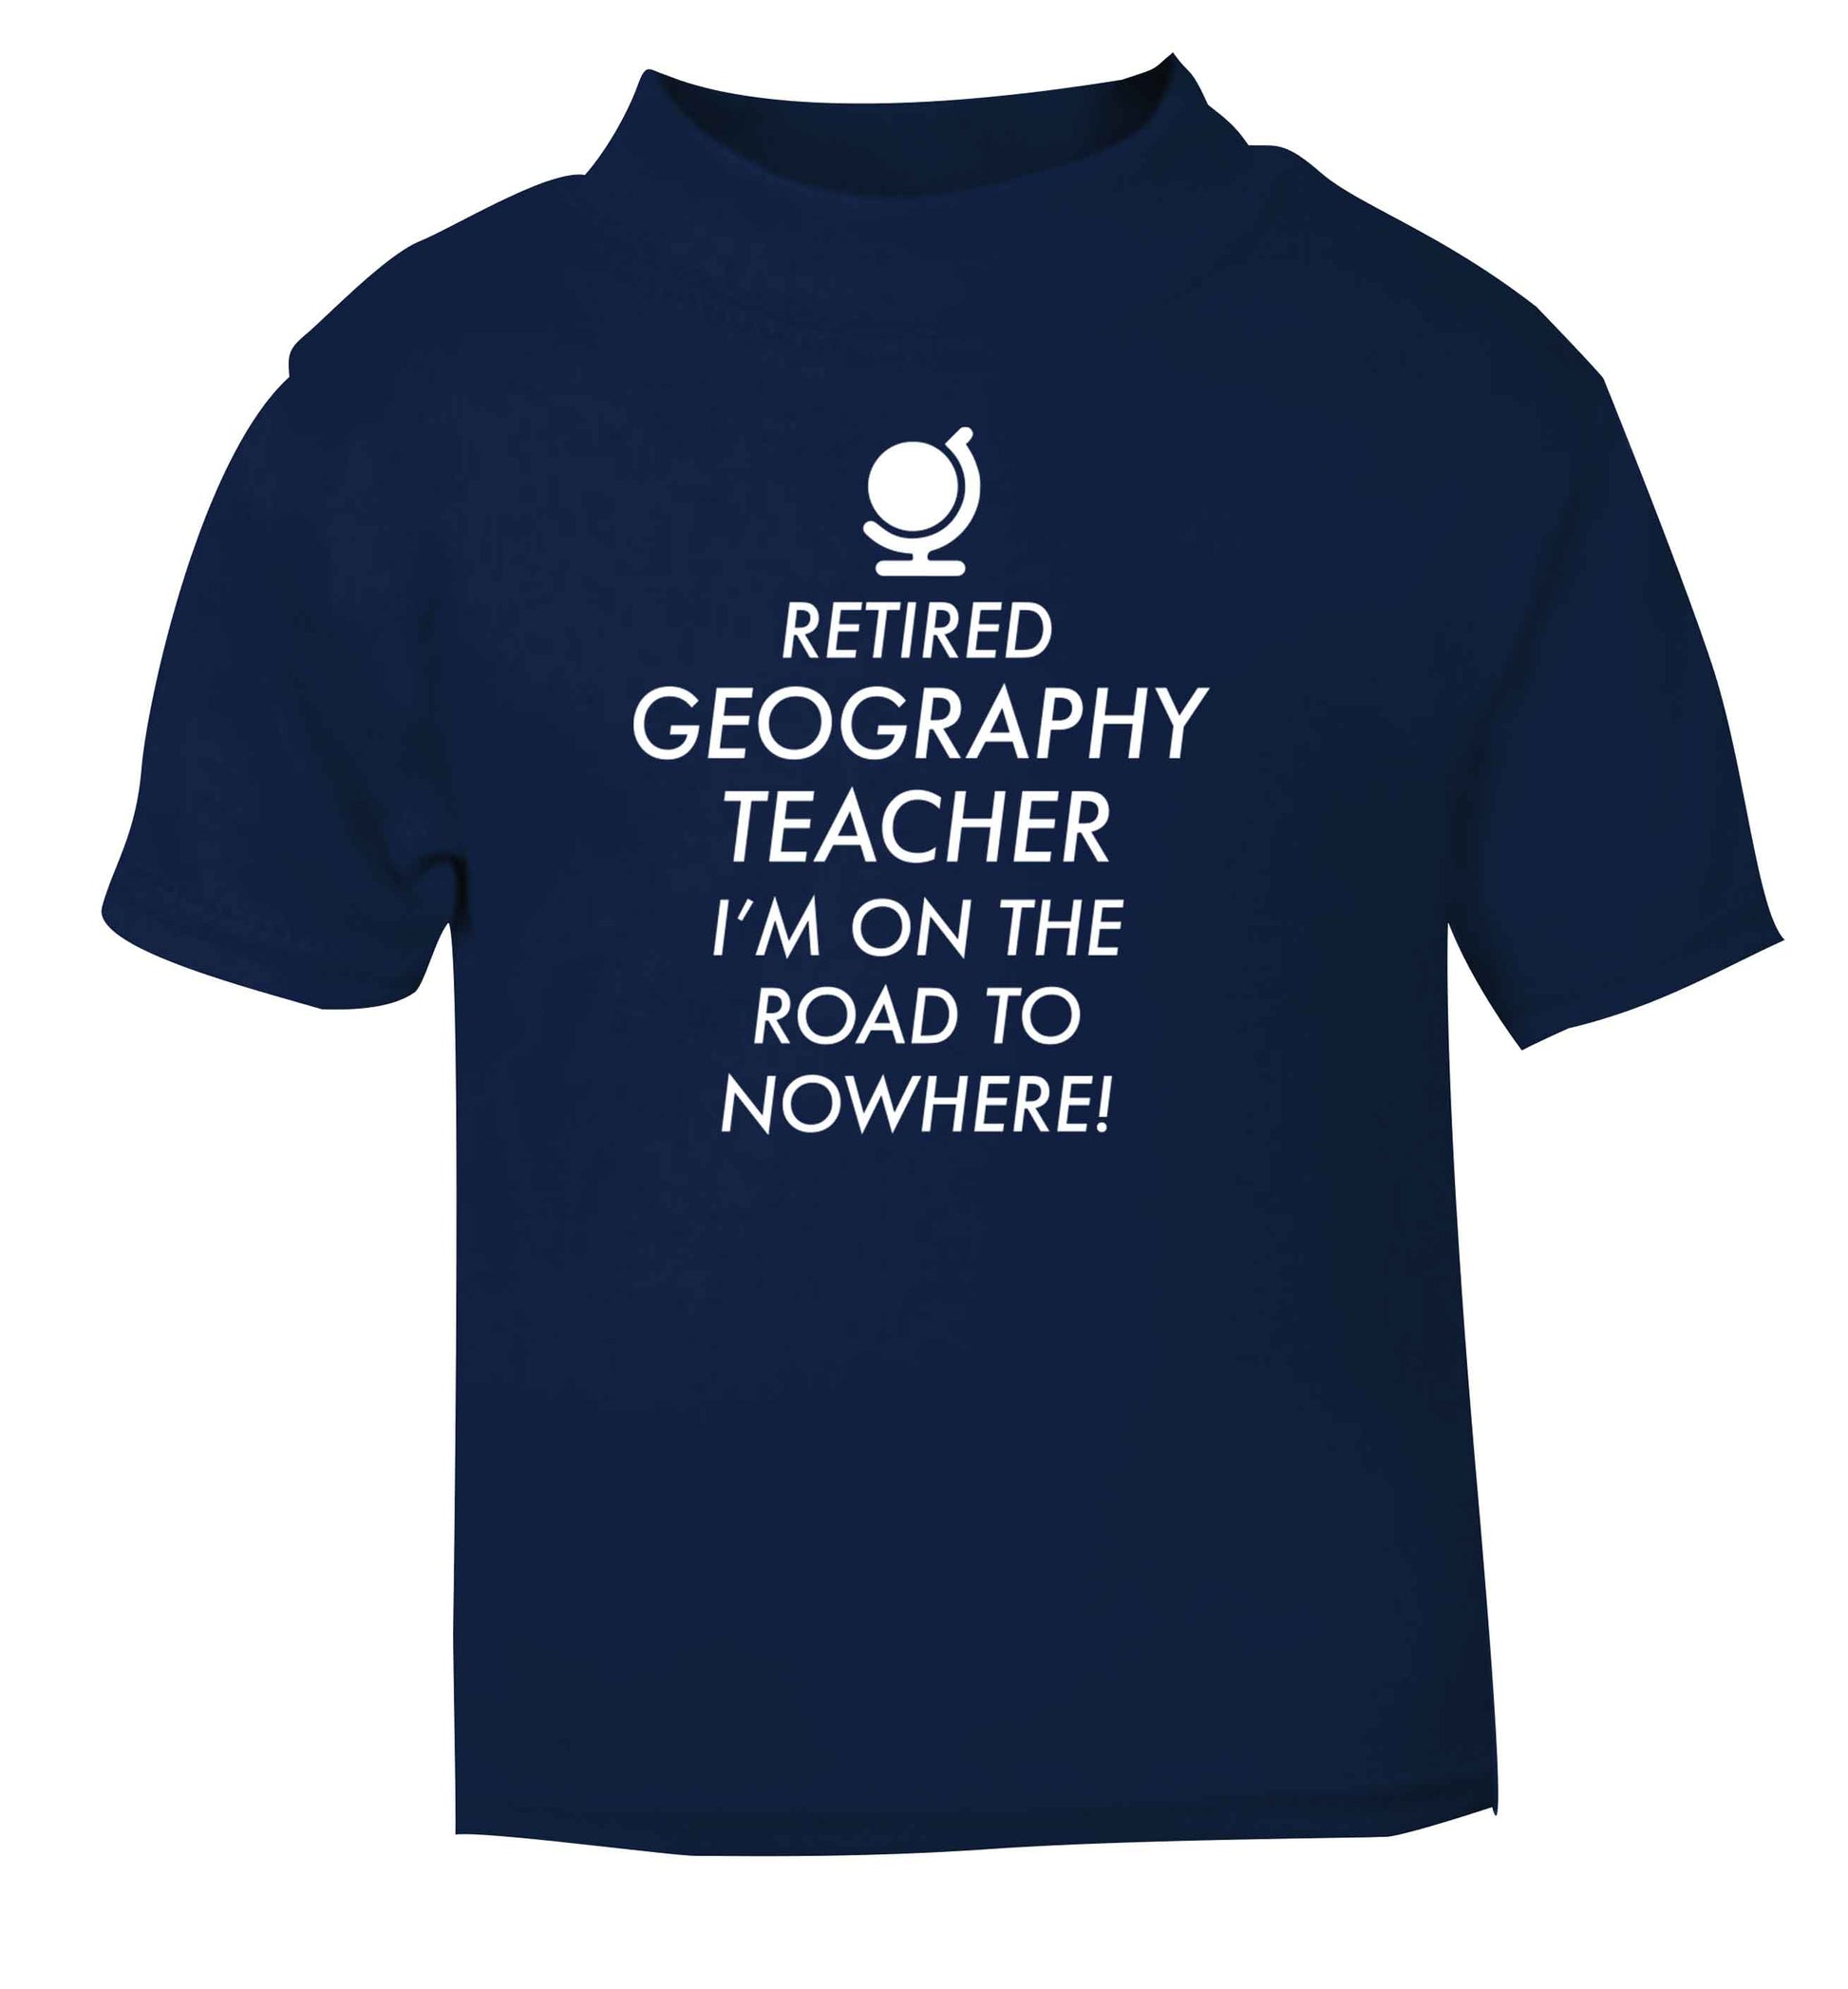 Retired geography teacher I'm on the road to nowhere navy Baby Toddler Tshirt 2 Years